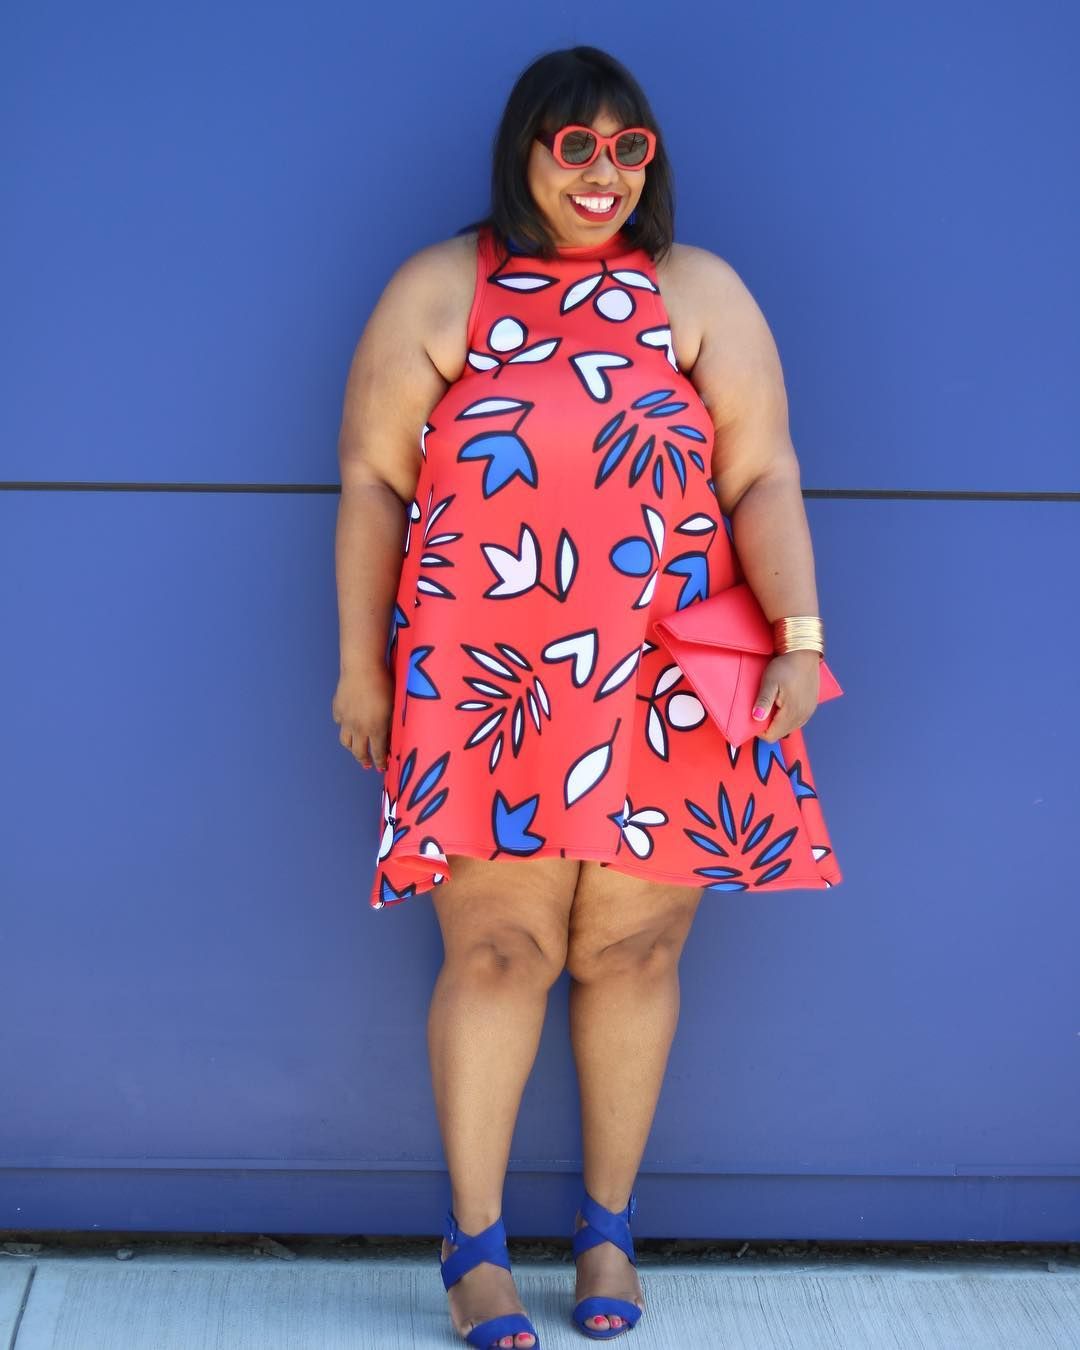 TCFStyle RoundUp: 10 Amazing Plus Size Prints and Pattern Outfit Ideas for Inspo!